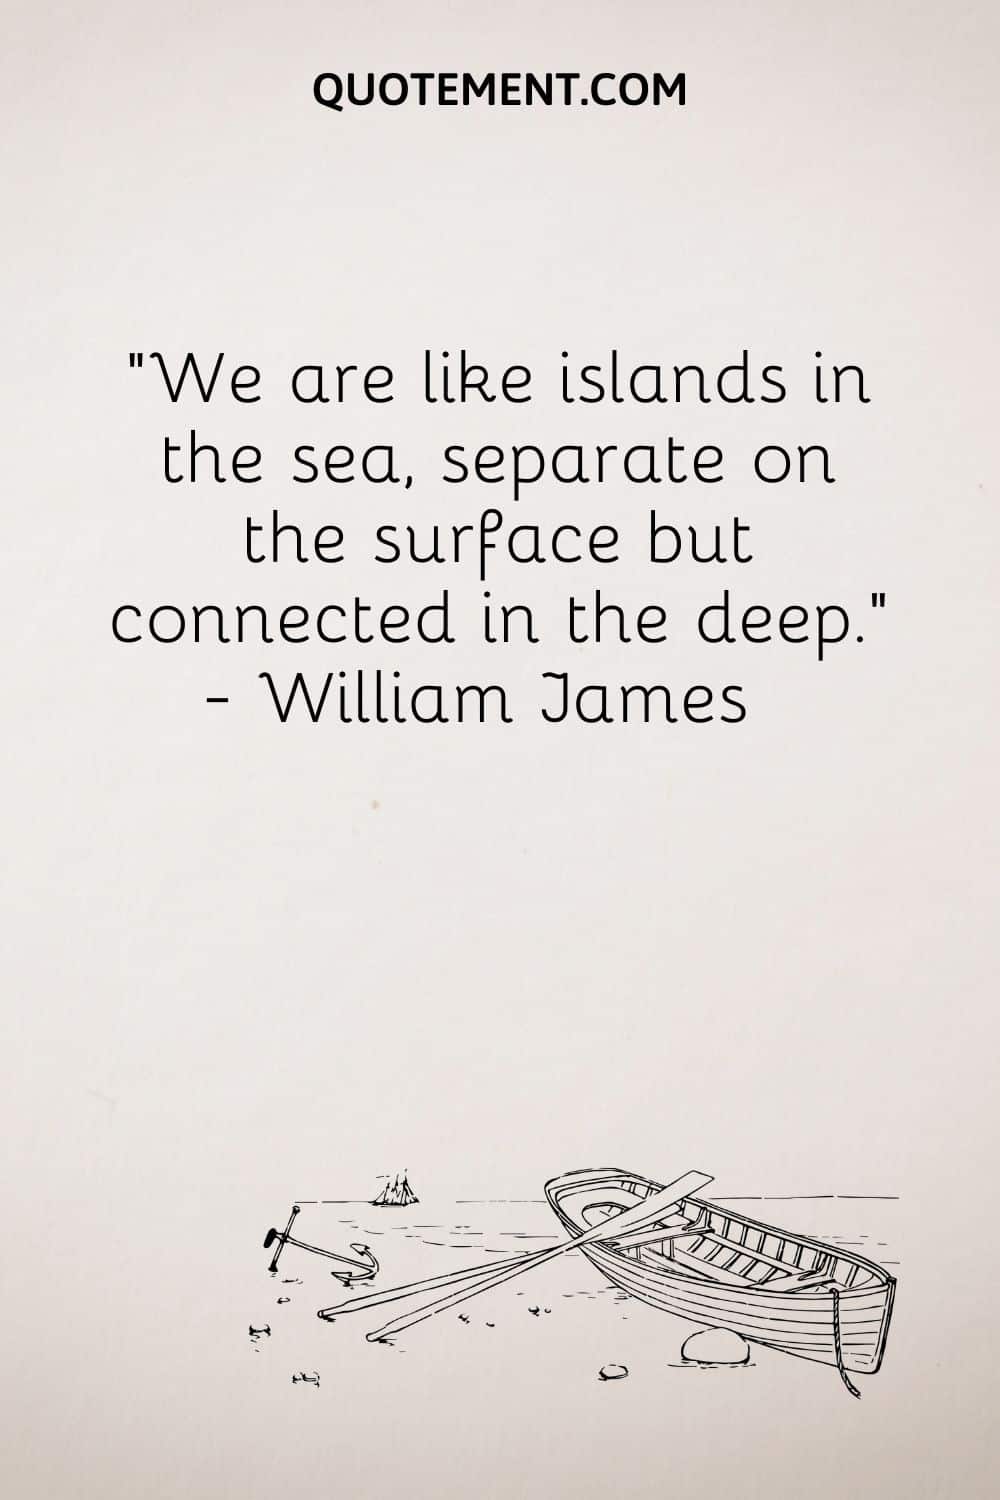 We are like islands in the sea, separate on the surface but connected in the deep. — William James